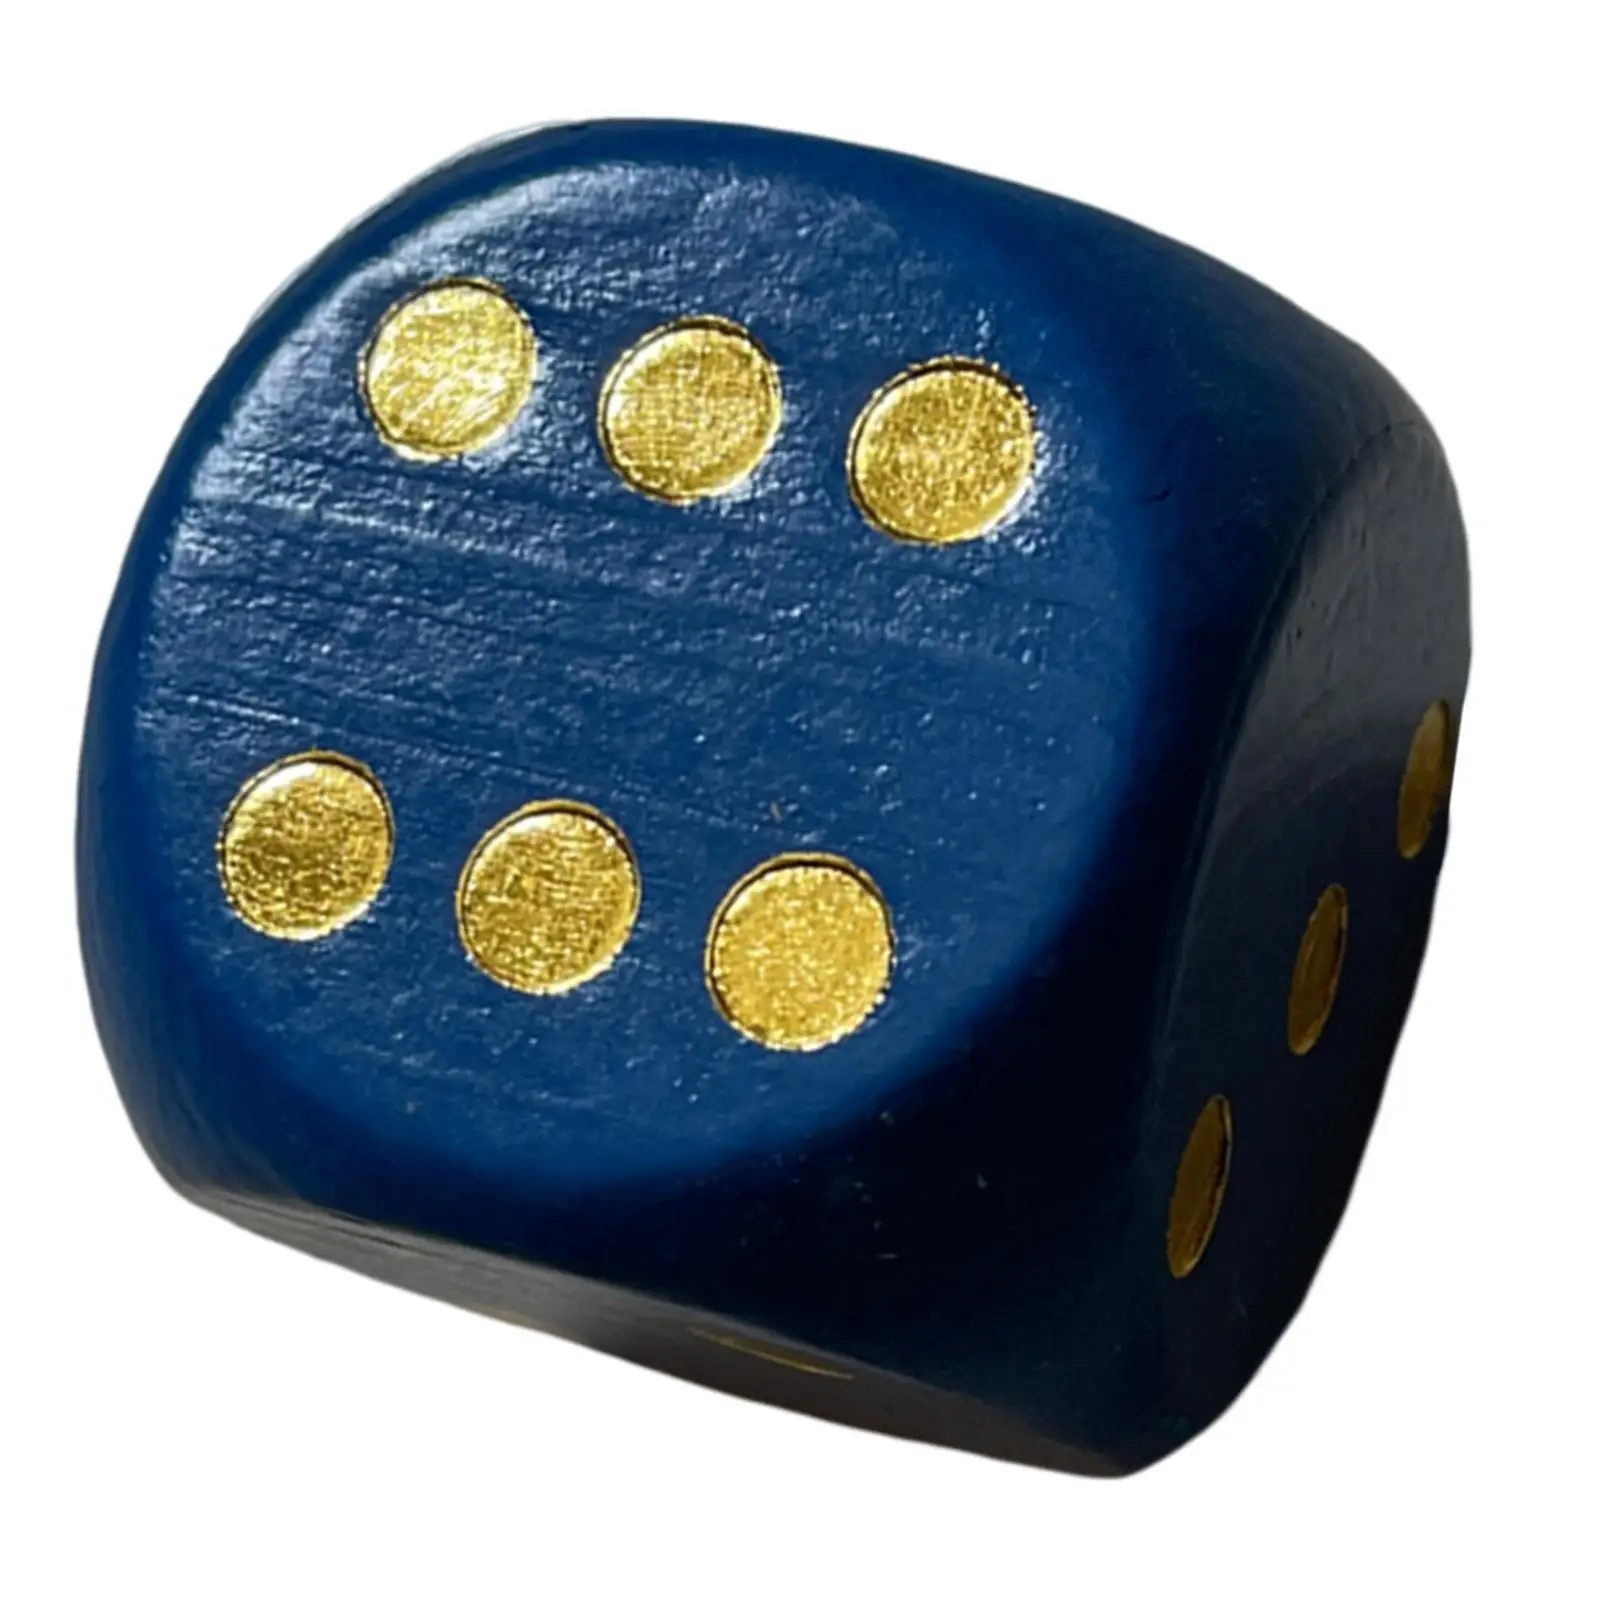 Extra Large Wooden Dice with Rounded Corner D6 Six Sided Dice 5cm Blue